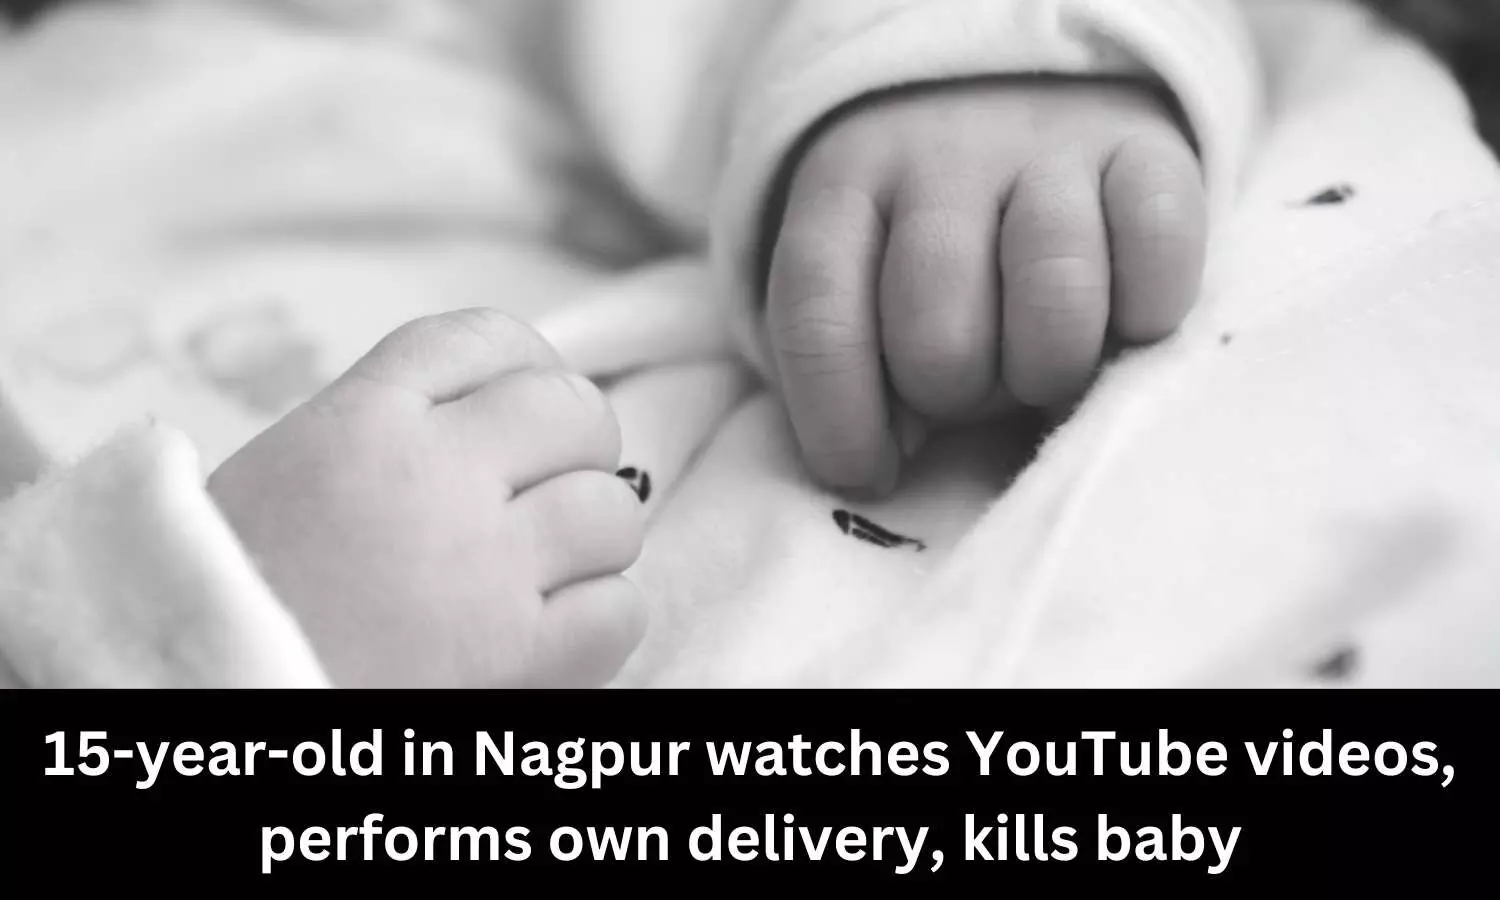 15-year-old watches YouTube videos, performs own delivery, kills baby